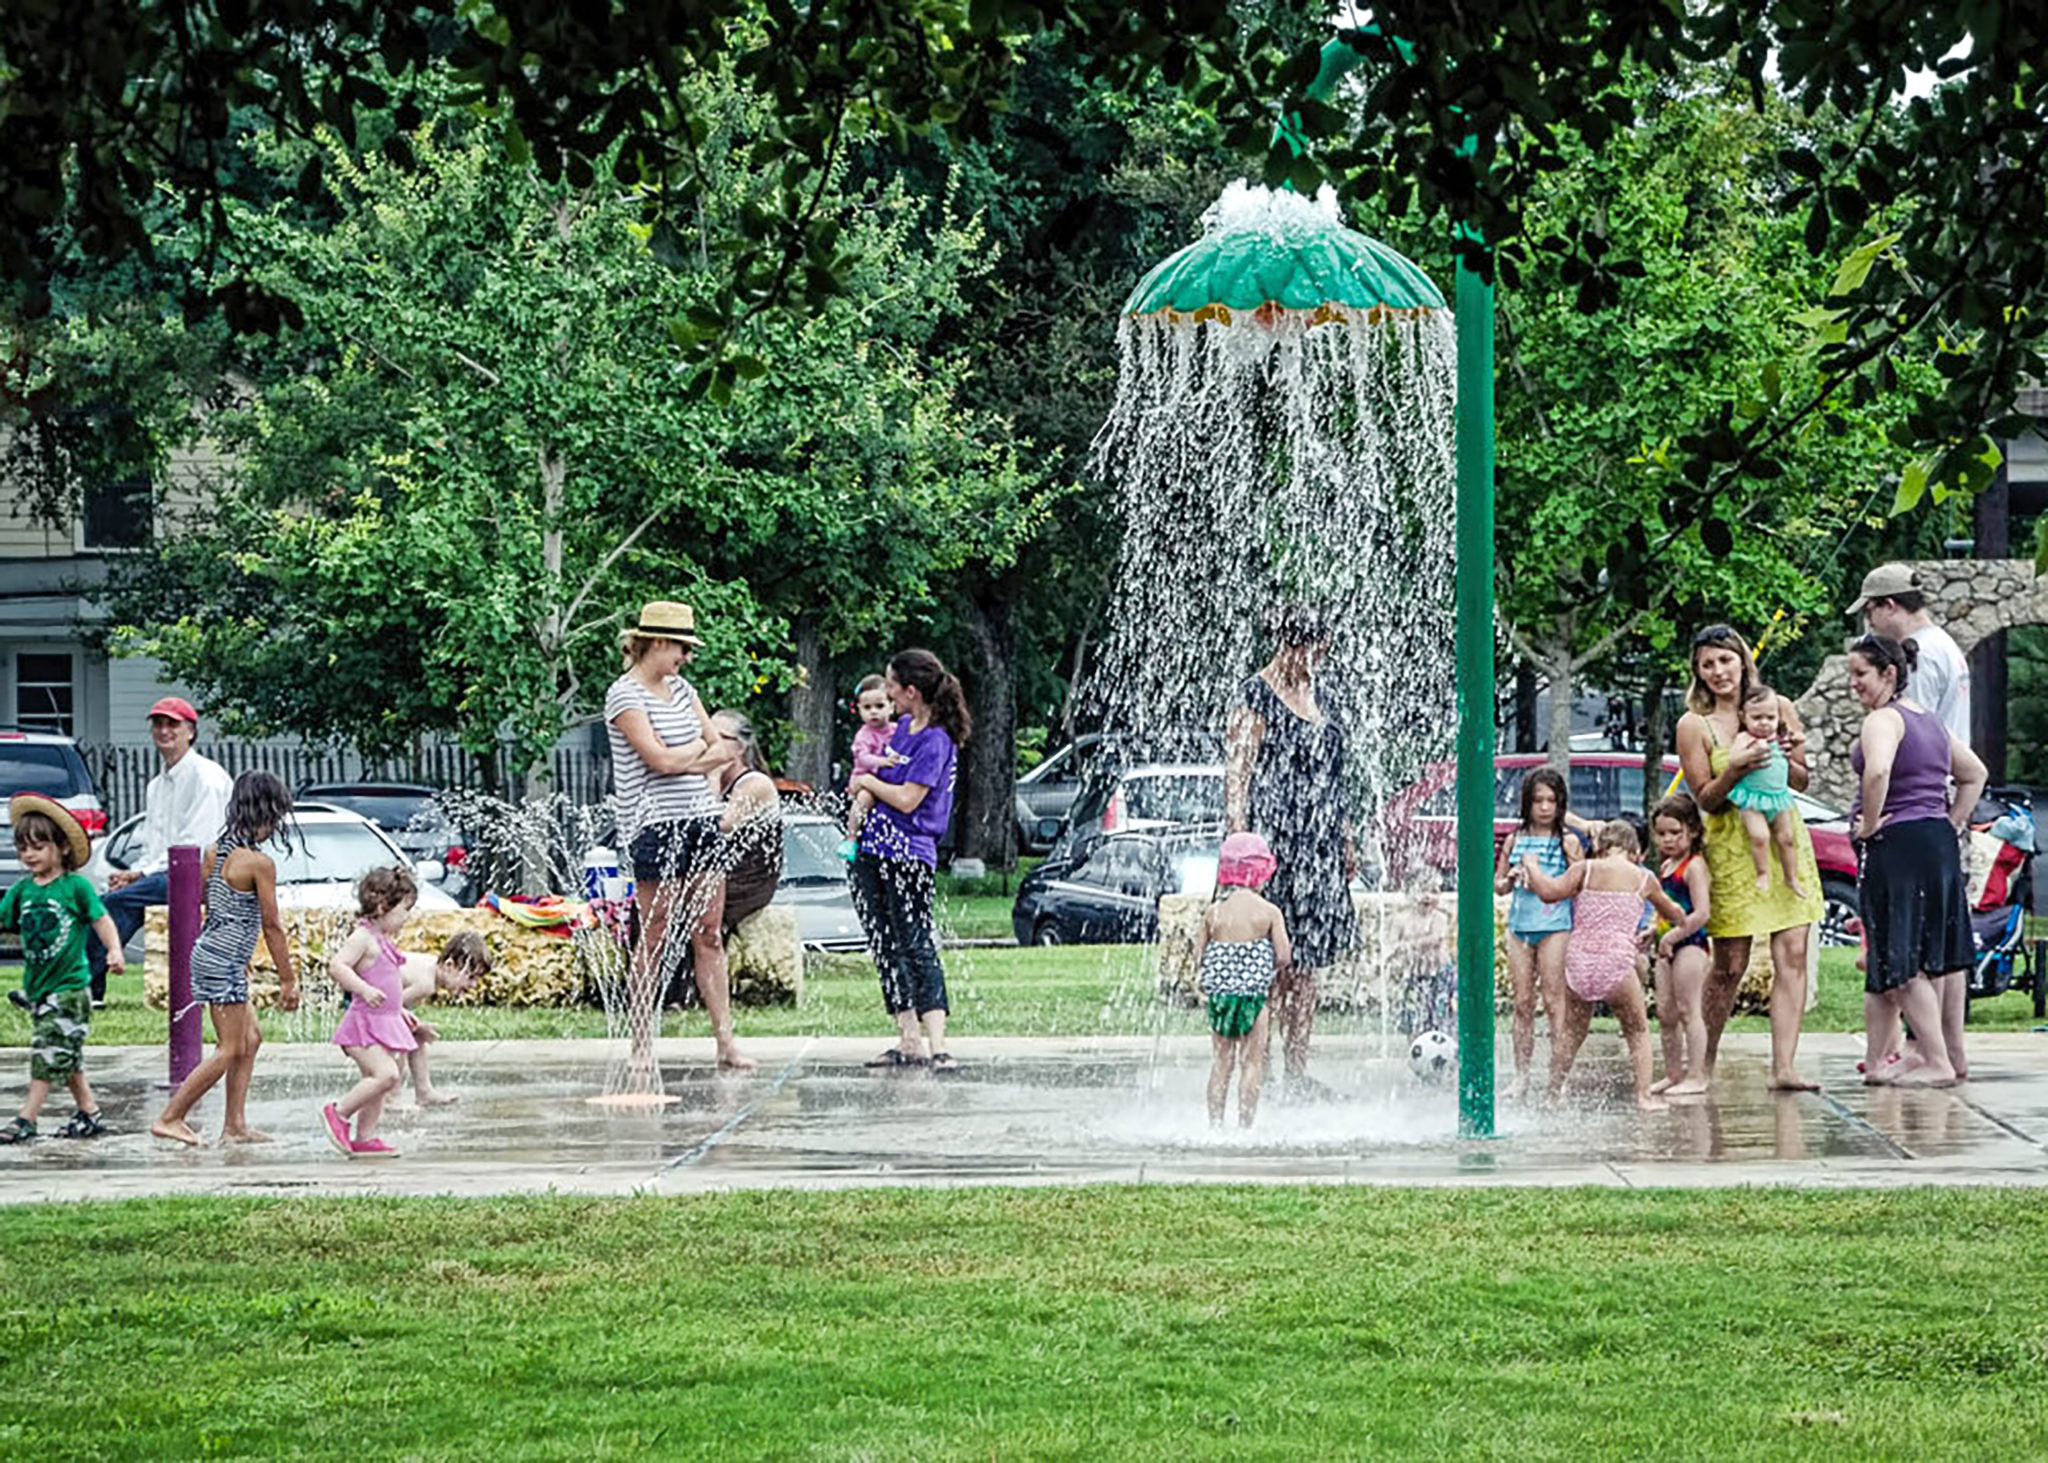 Kids playing at a public water park